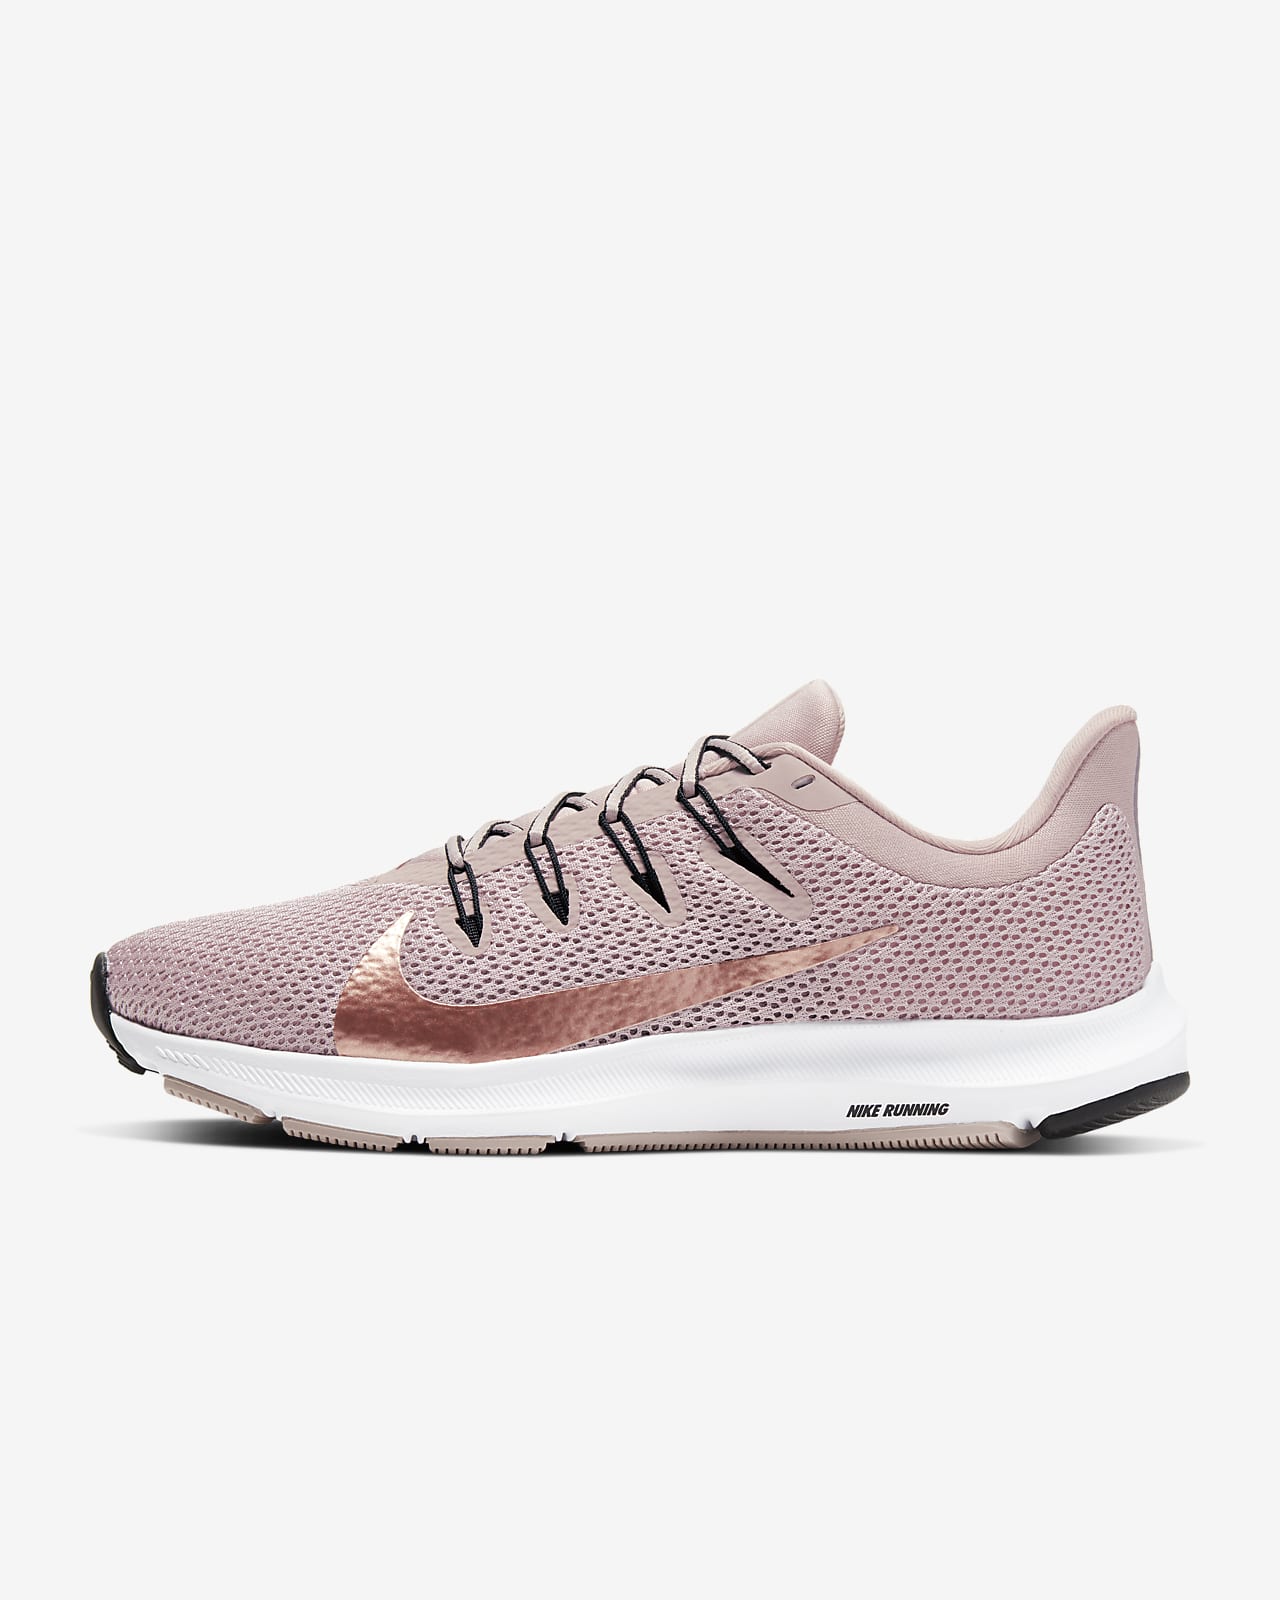 nike quest rust pink